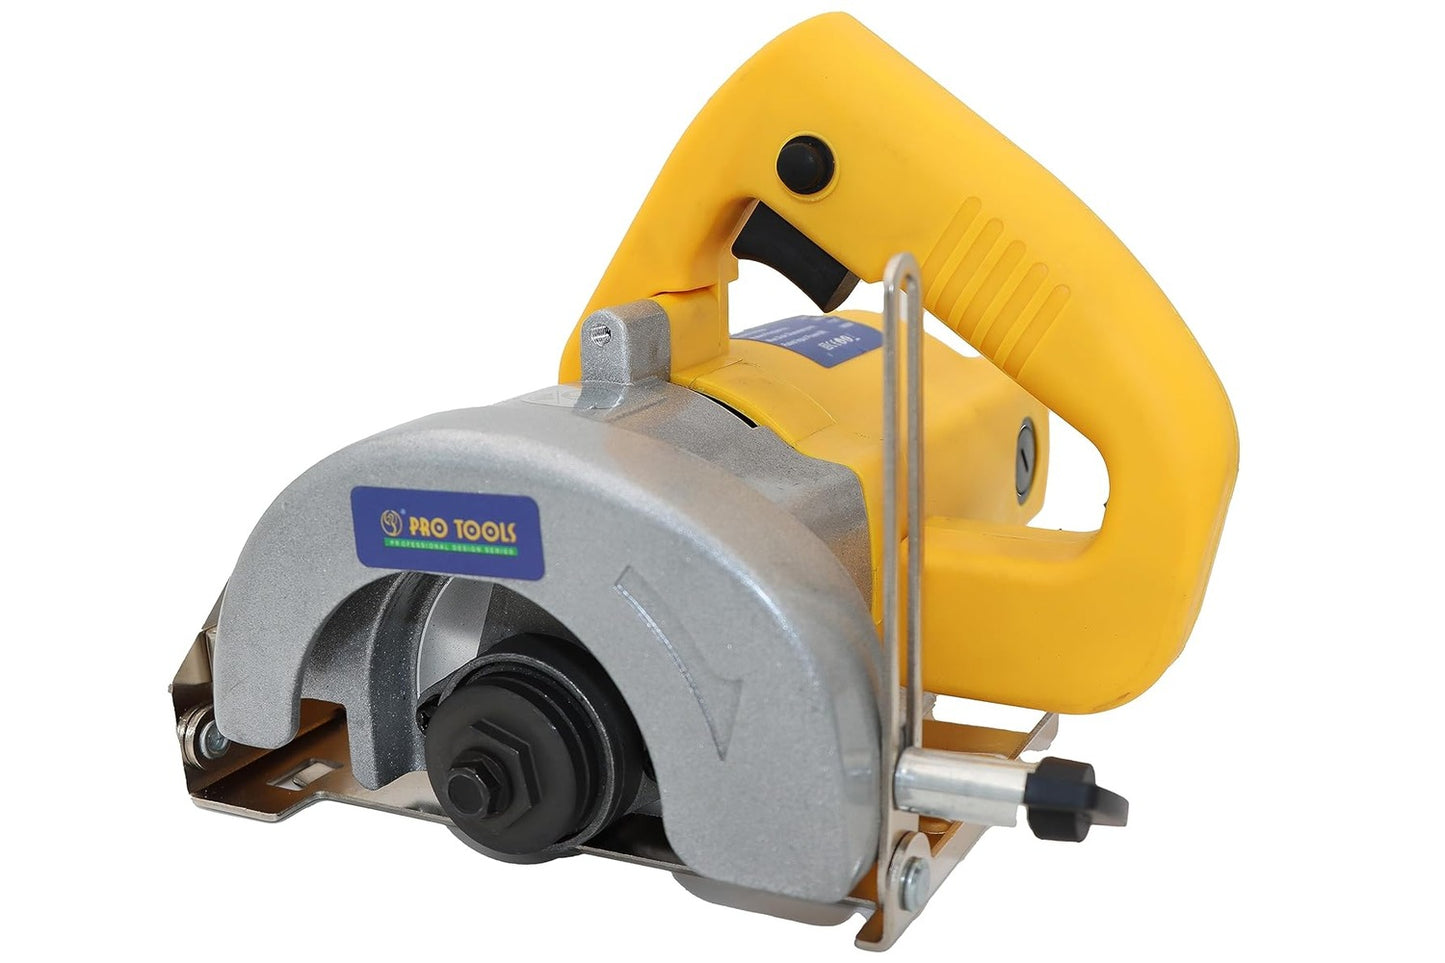 PRO TOOLS 1425-A, Marble/Tile/Granite/Stone/Brick/Porcelain/Ceramic Cutter without Blade (1450 W, 13000 Rpm, 5 Inch)